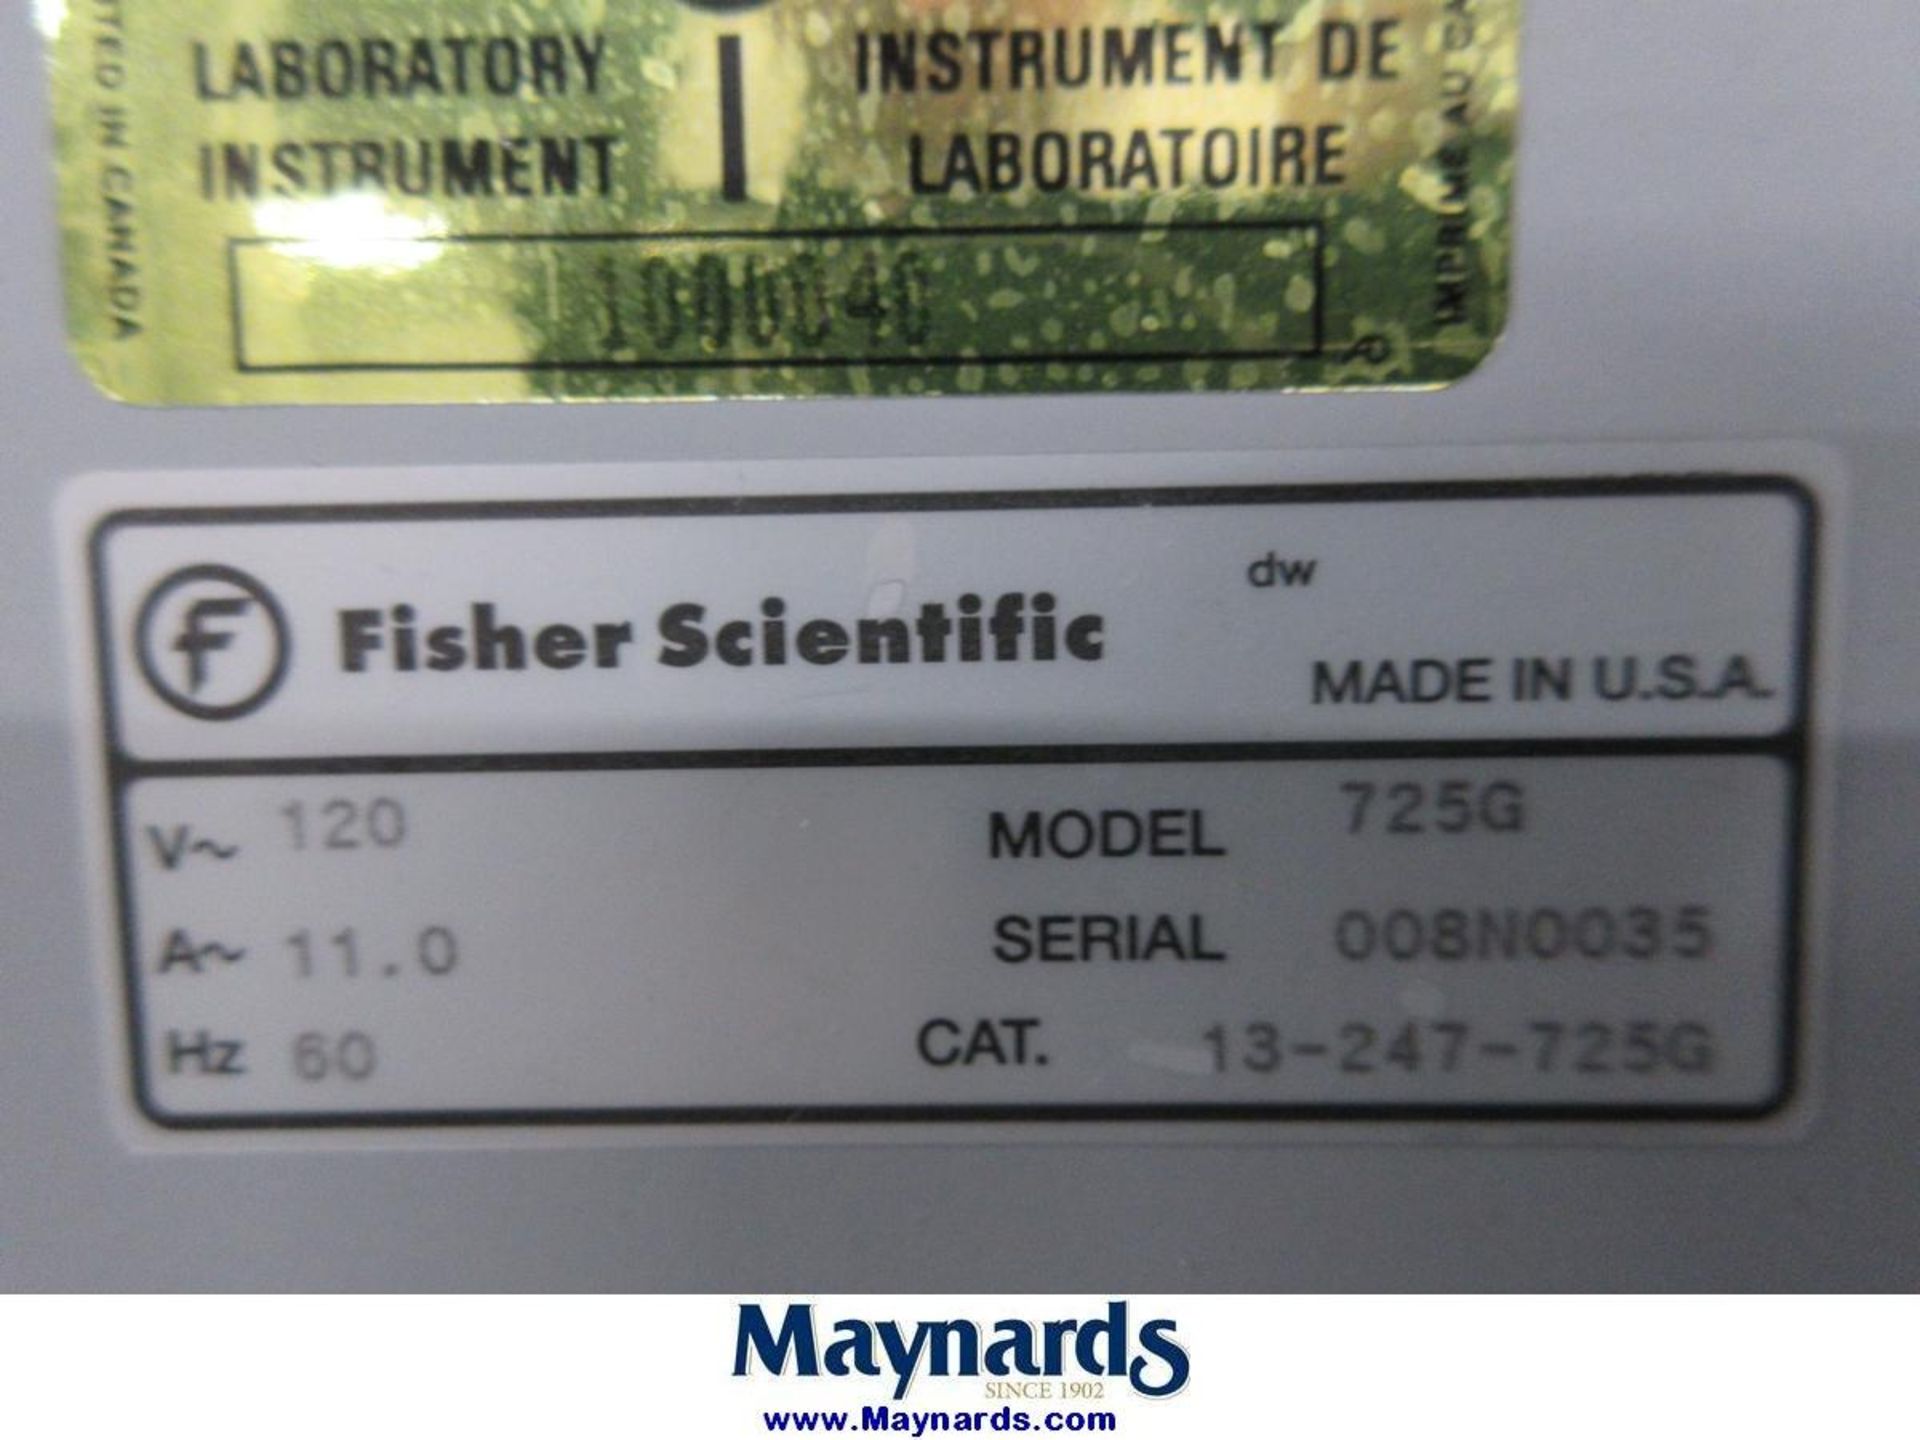 Fisher Scientific 725G Lab Oven - Image 8 of 8